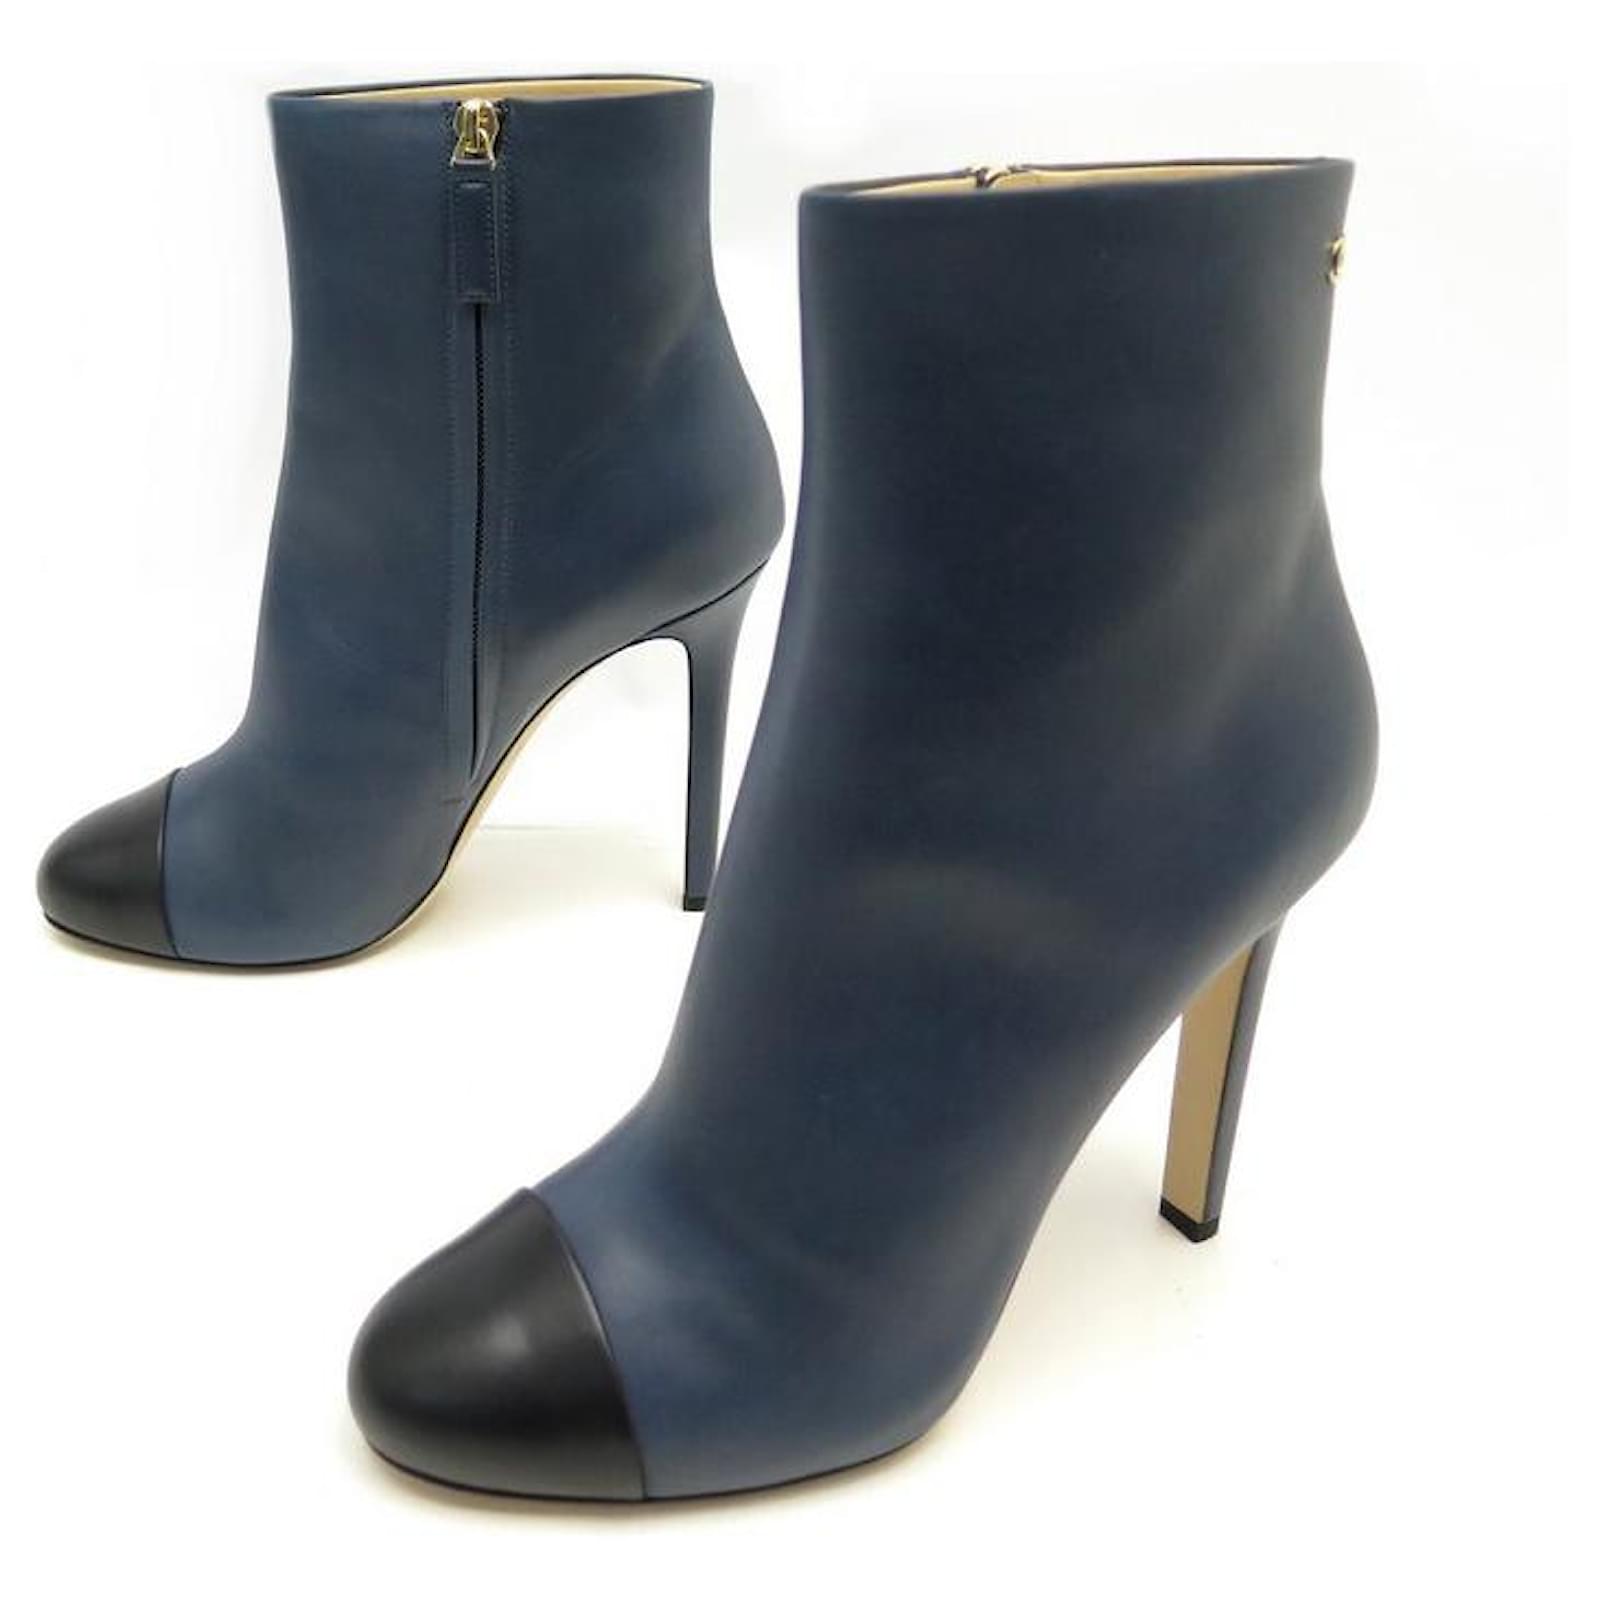 NEW CHANEL G SHOES33306 BLACK BLUE TWO-TONE LEATHER ANKLE BOOTS